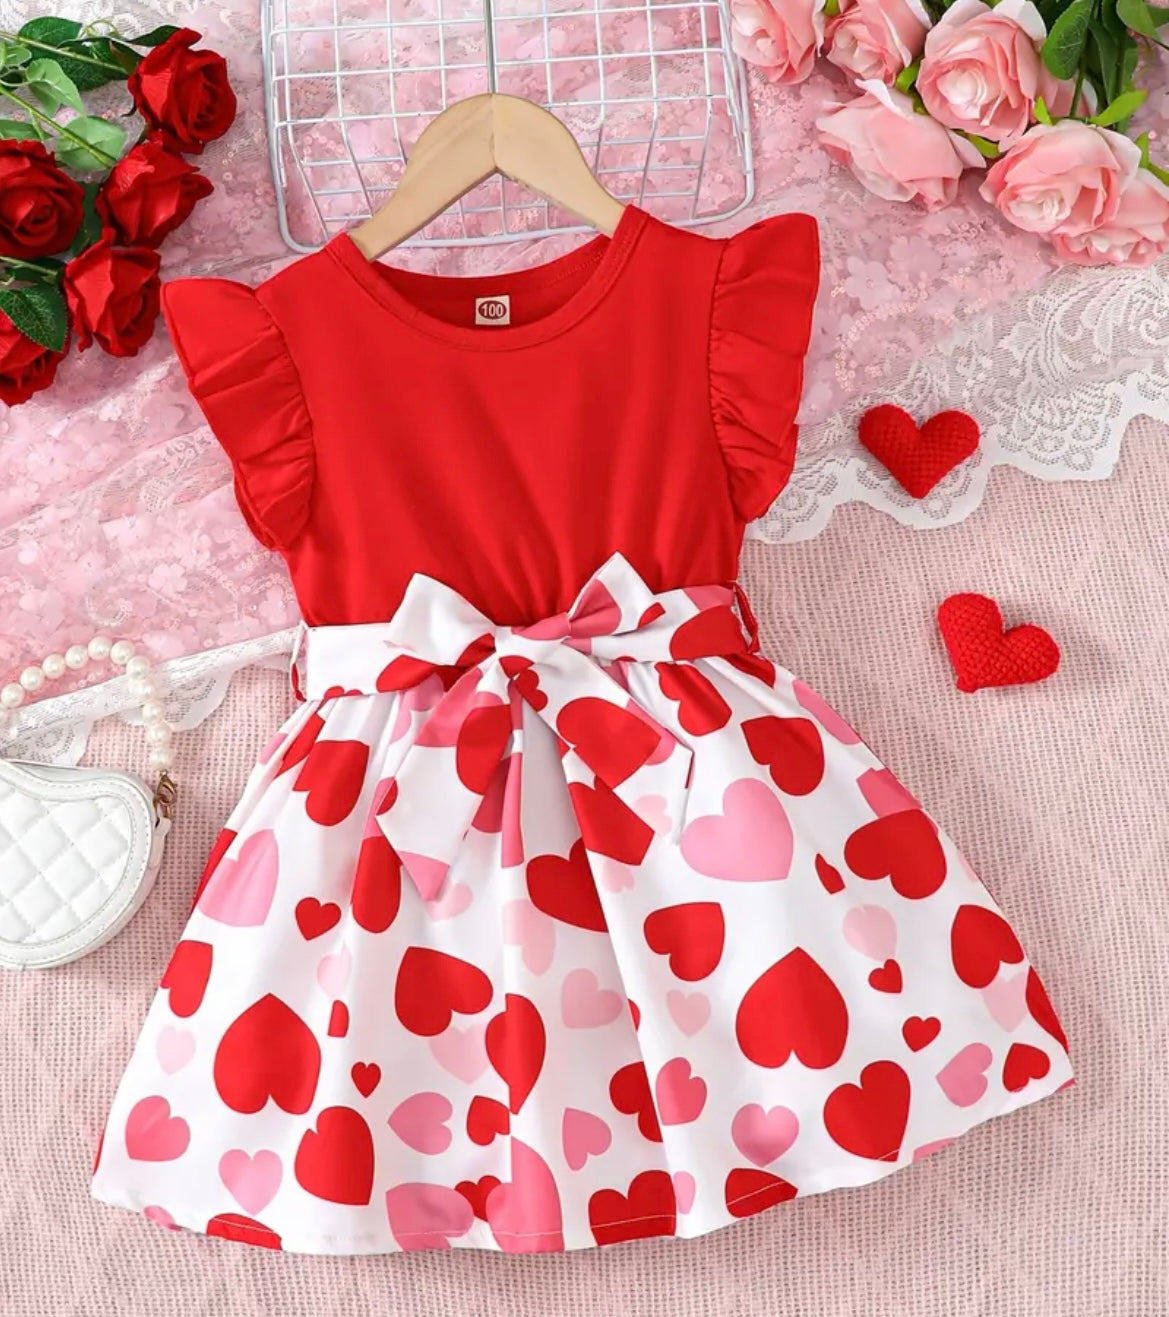 Angelwing two tone Red/Hearts Valentines dress